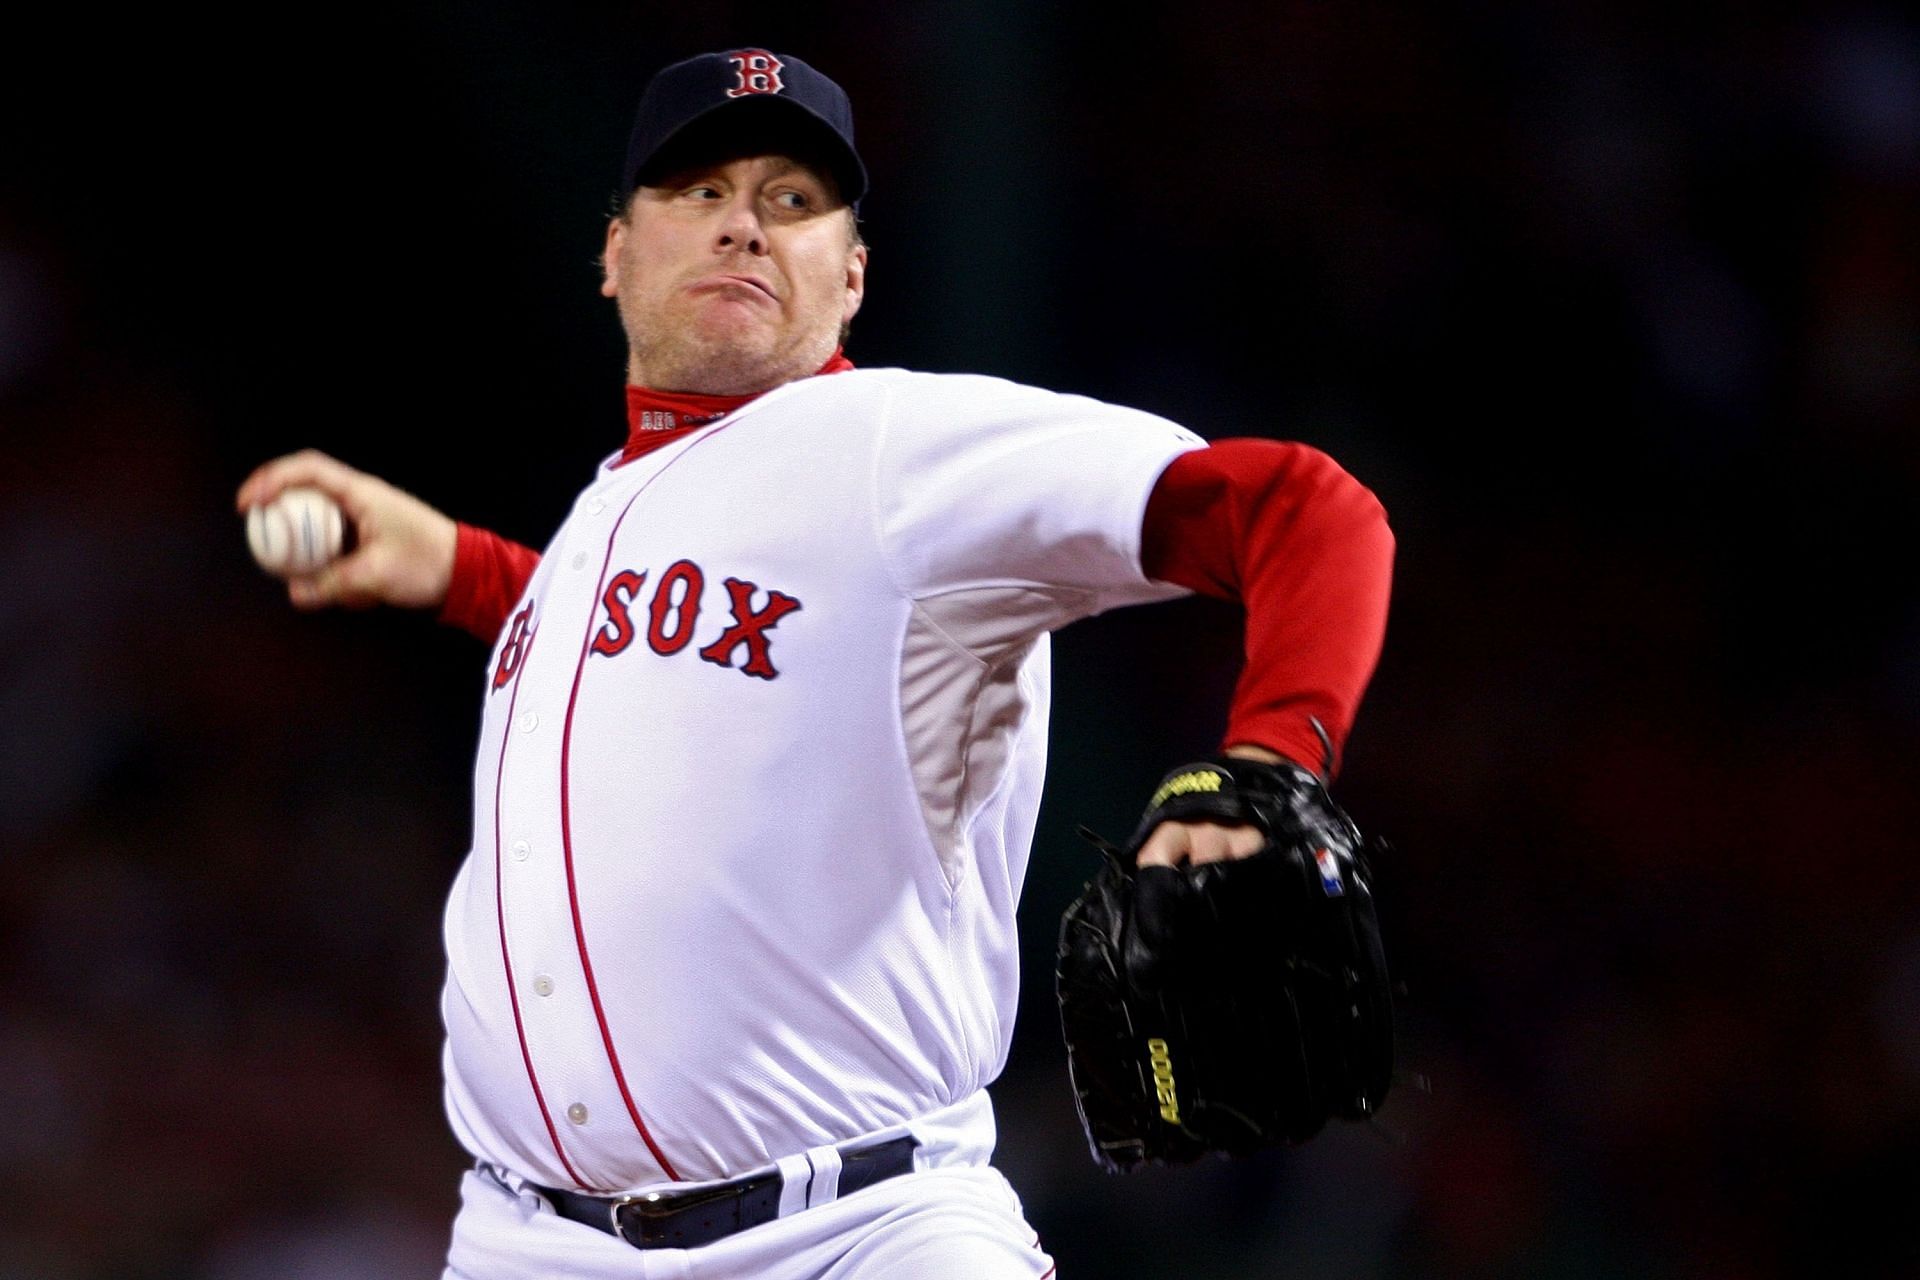 Starting pitcher Curt Schilling of the Boston Red Sox (Photo by Elsa/Getty Images)